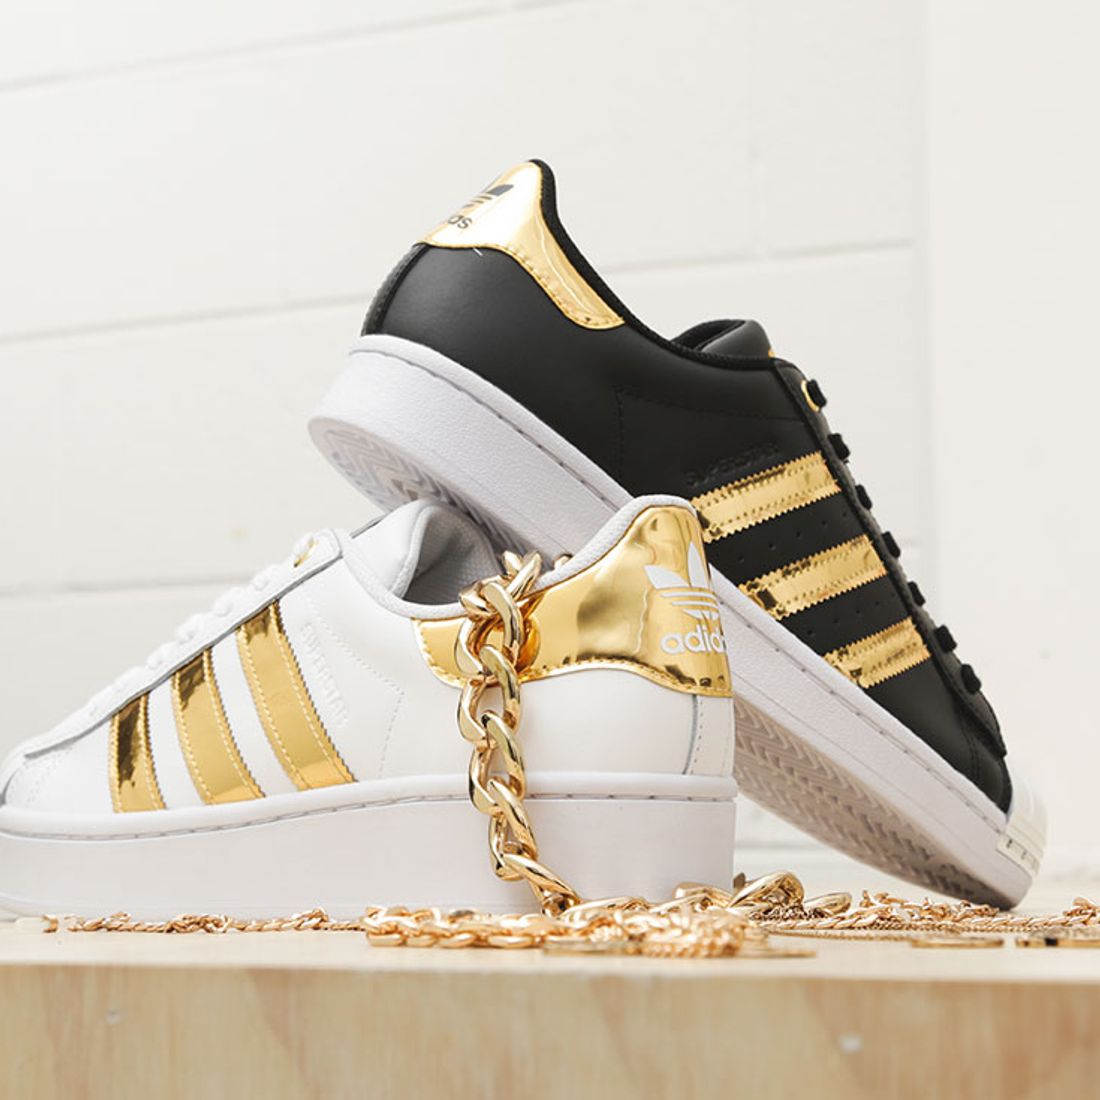 Posibilidades estéreo Cabra The adidas Superstar Goes for Gold in its 50th Year - Sneaker Freaker